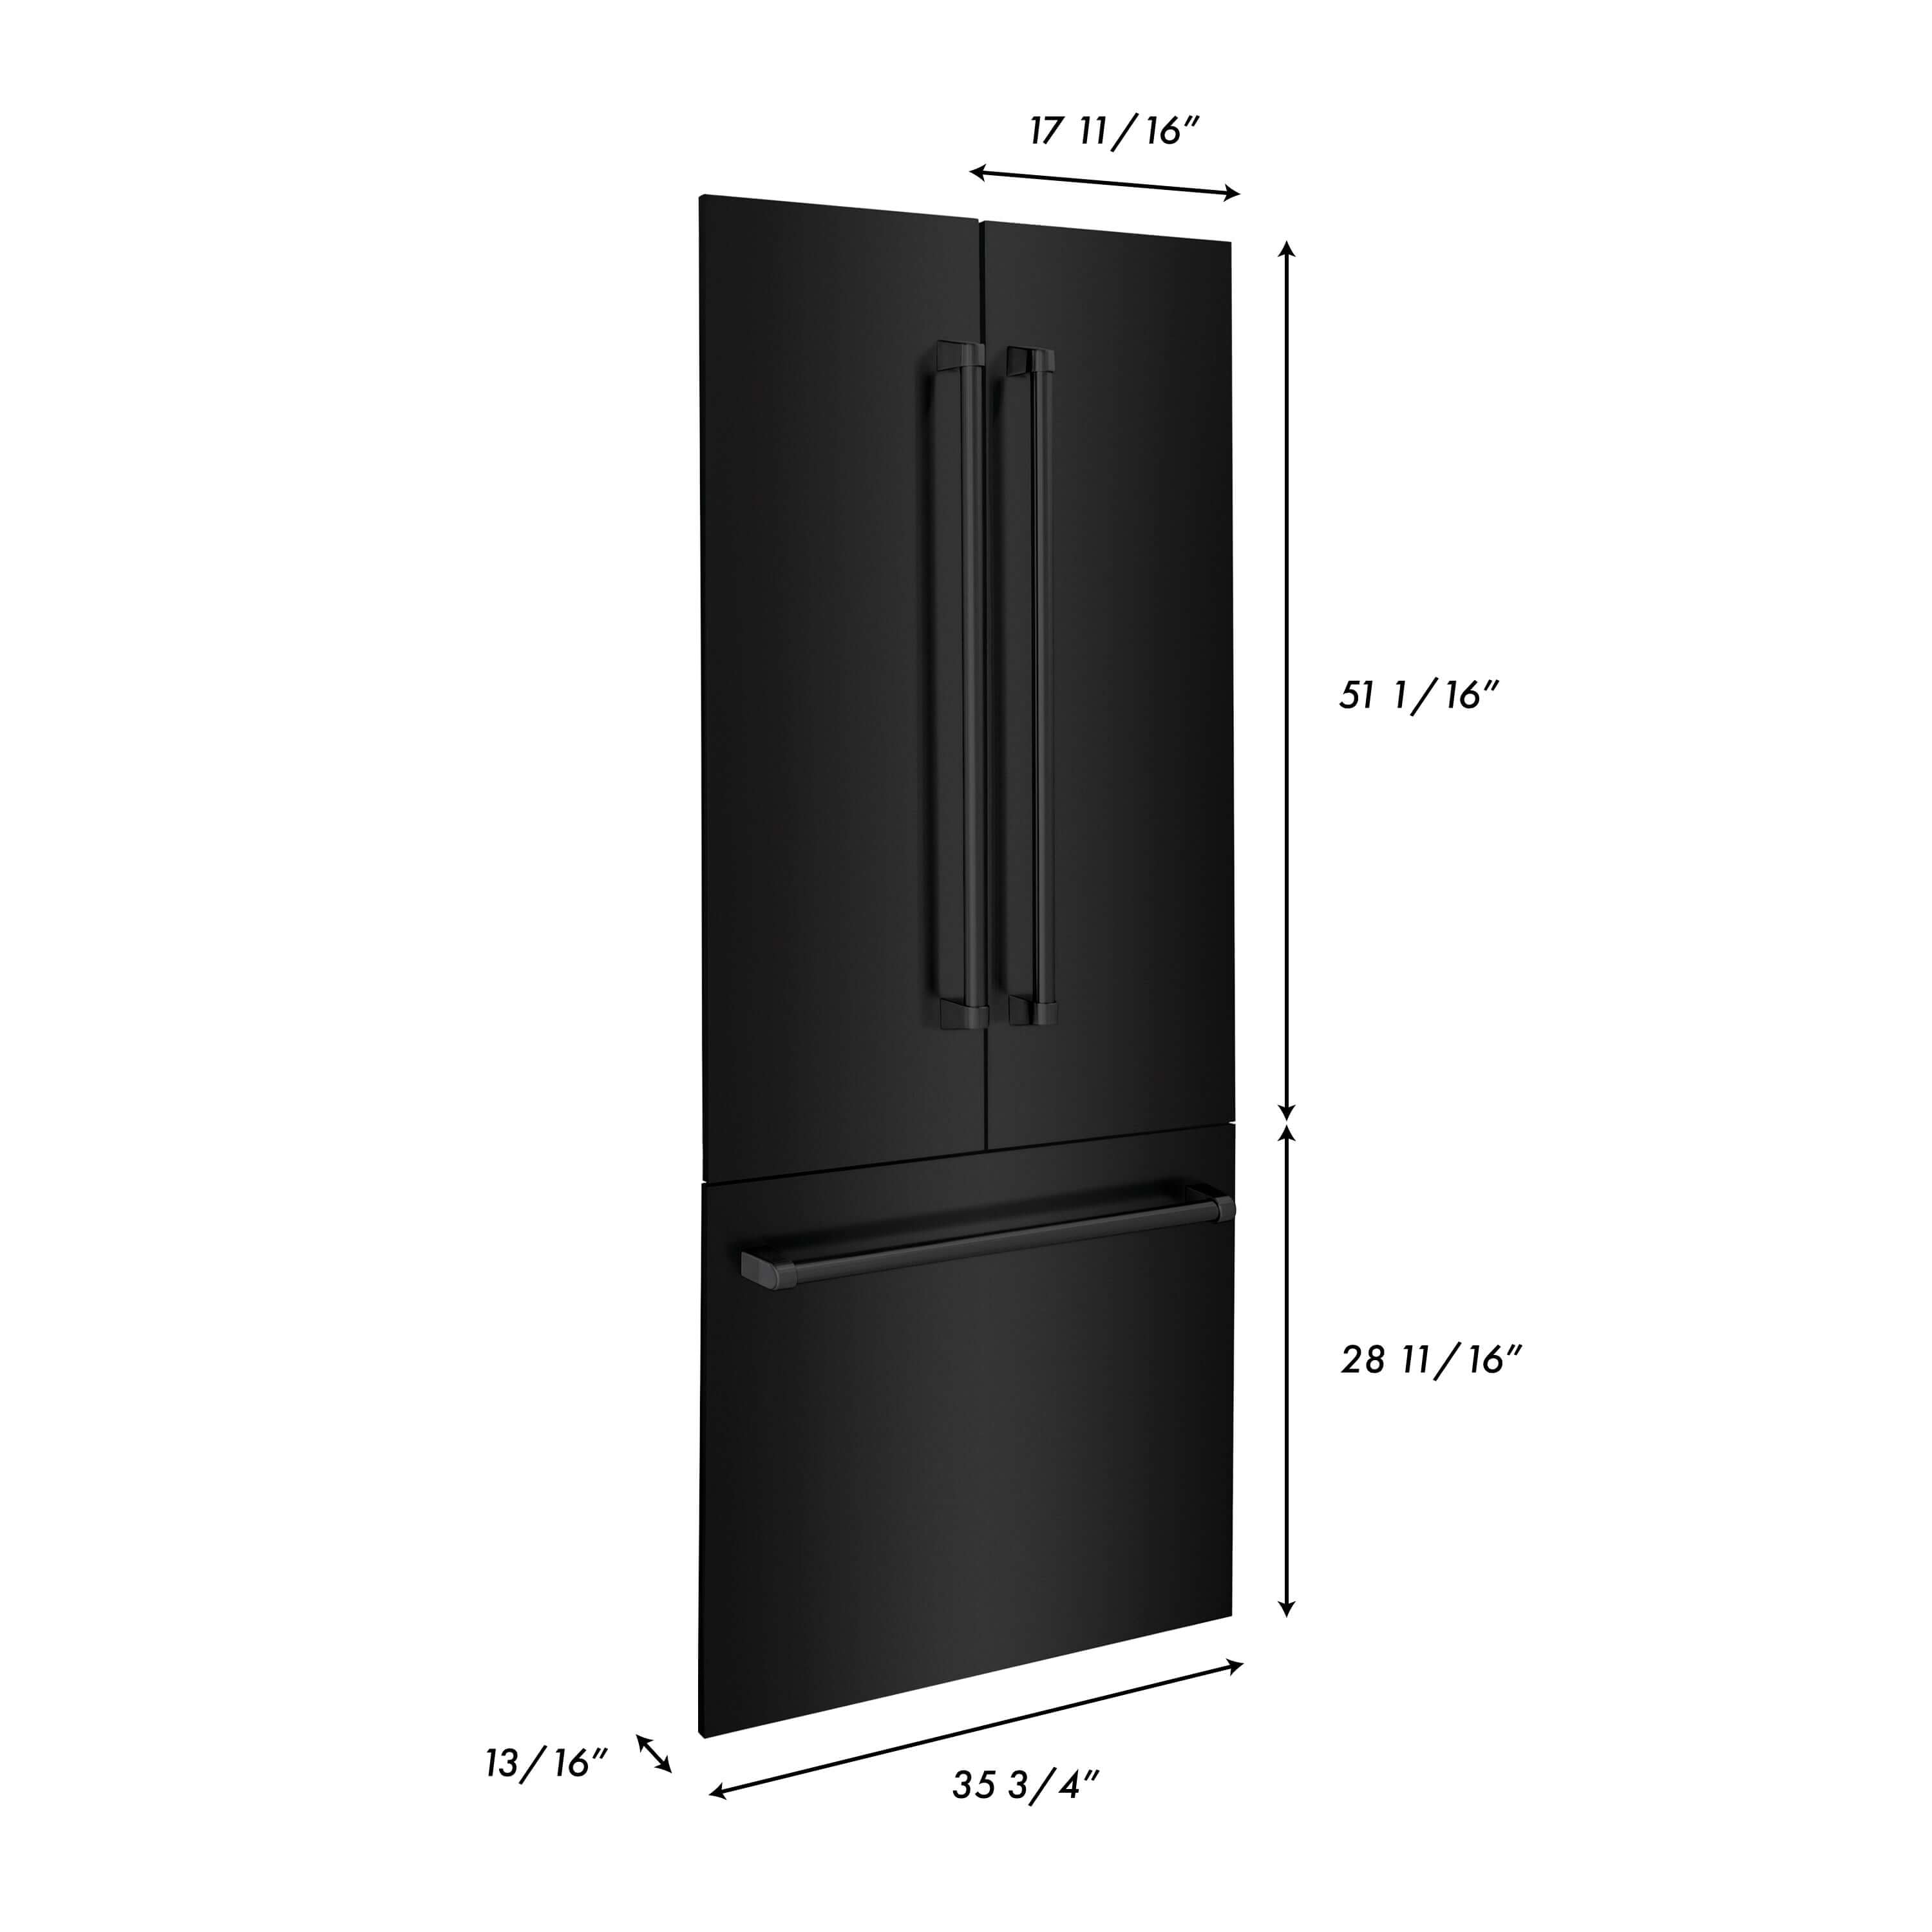 Panels & Handles Only- ZLINE 36 in. Refrigerator Panels in Black Stainless Steel for a 36 in. Built-in Refrigerator (RPBIV-BS-36) dimensional diagram with measurements.